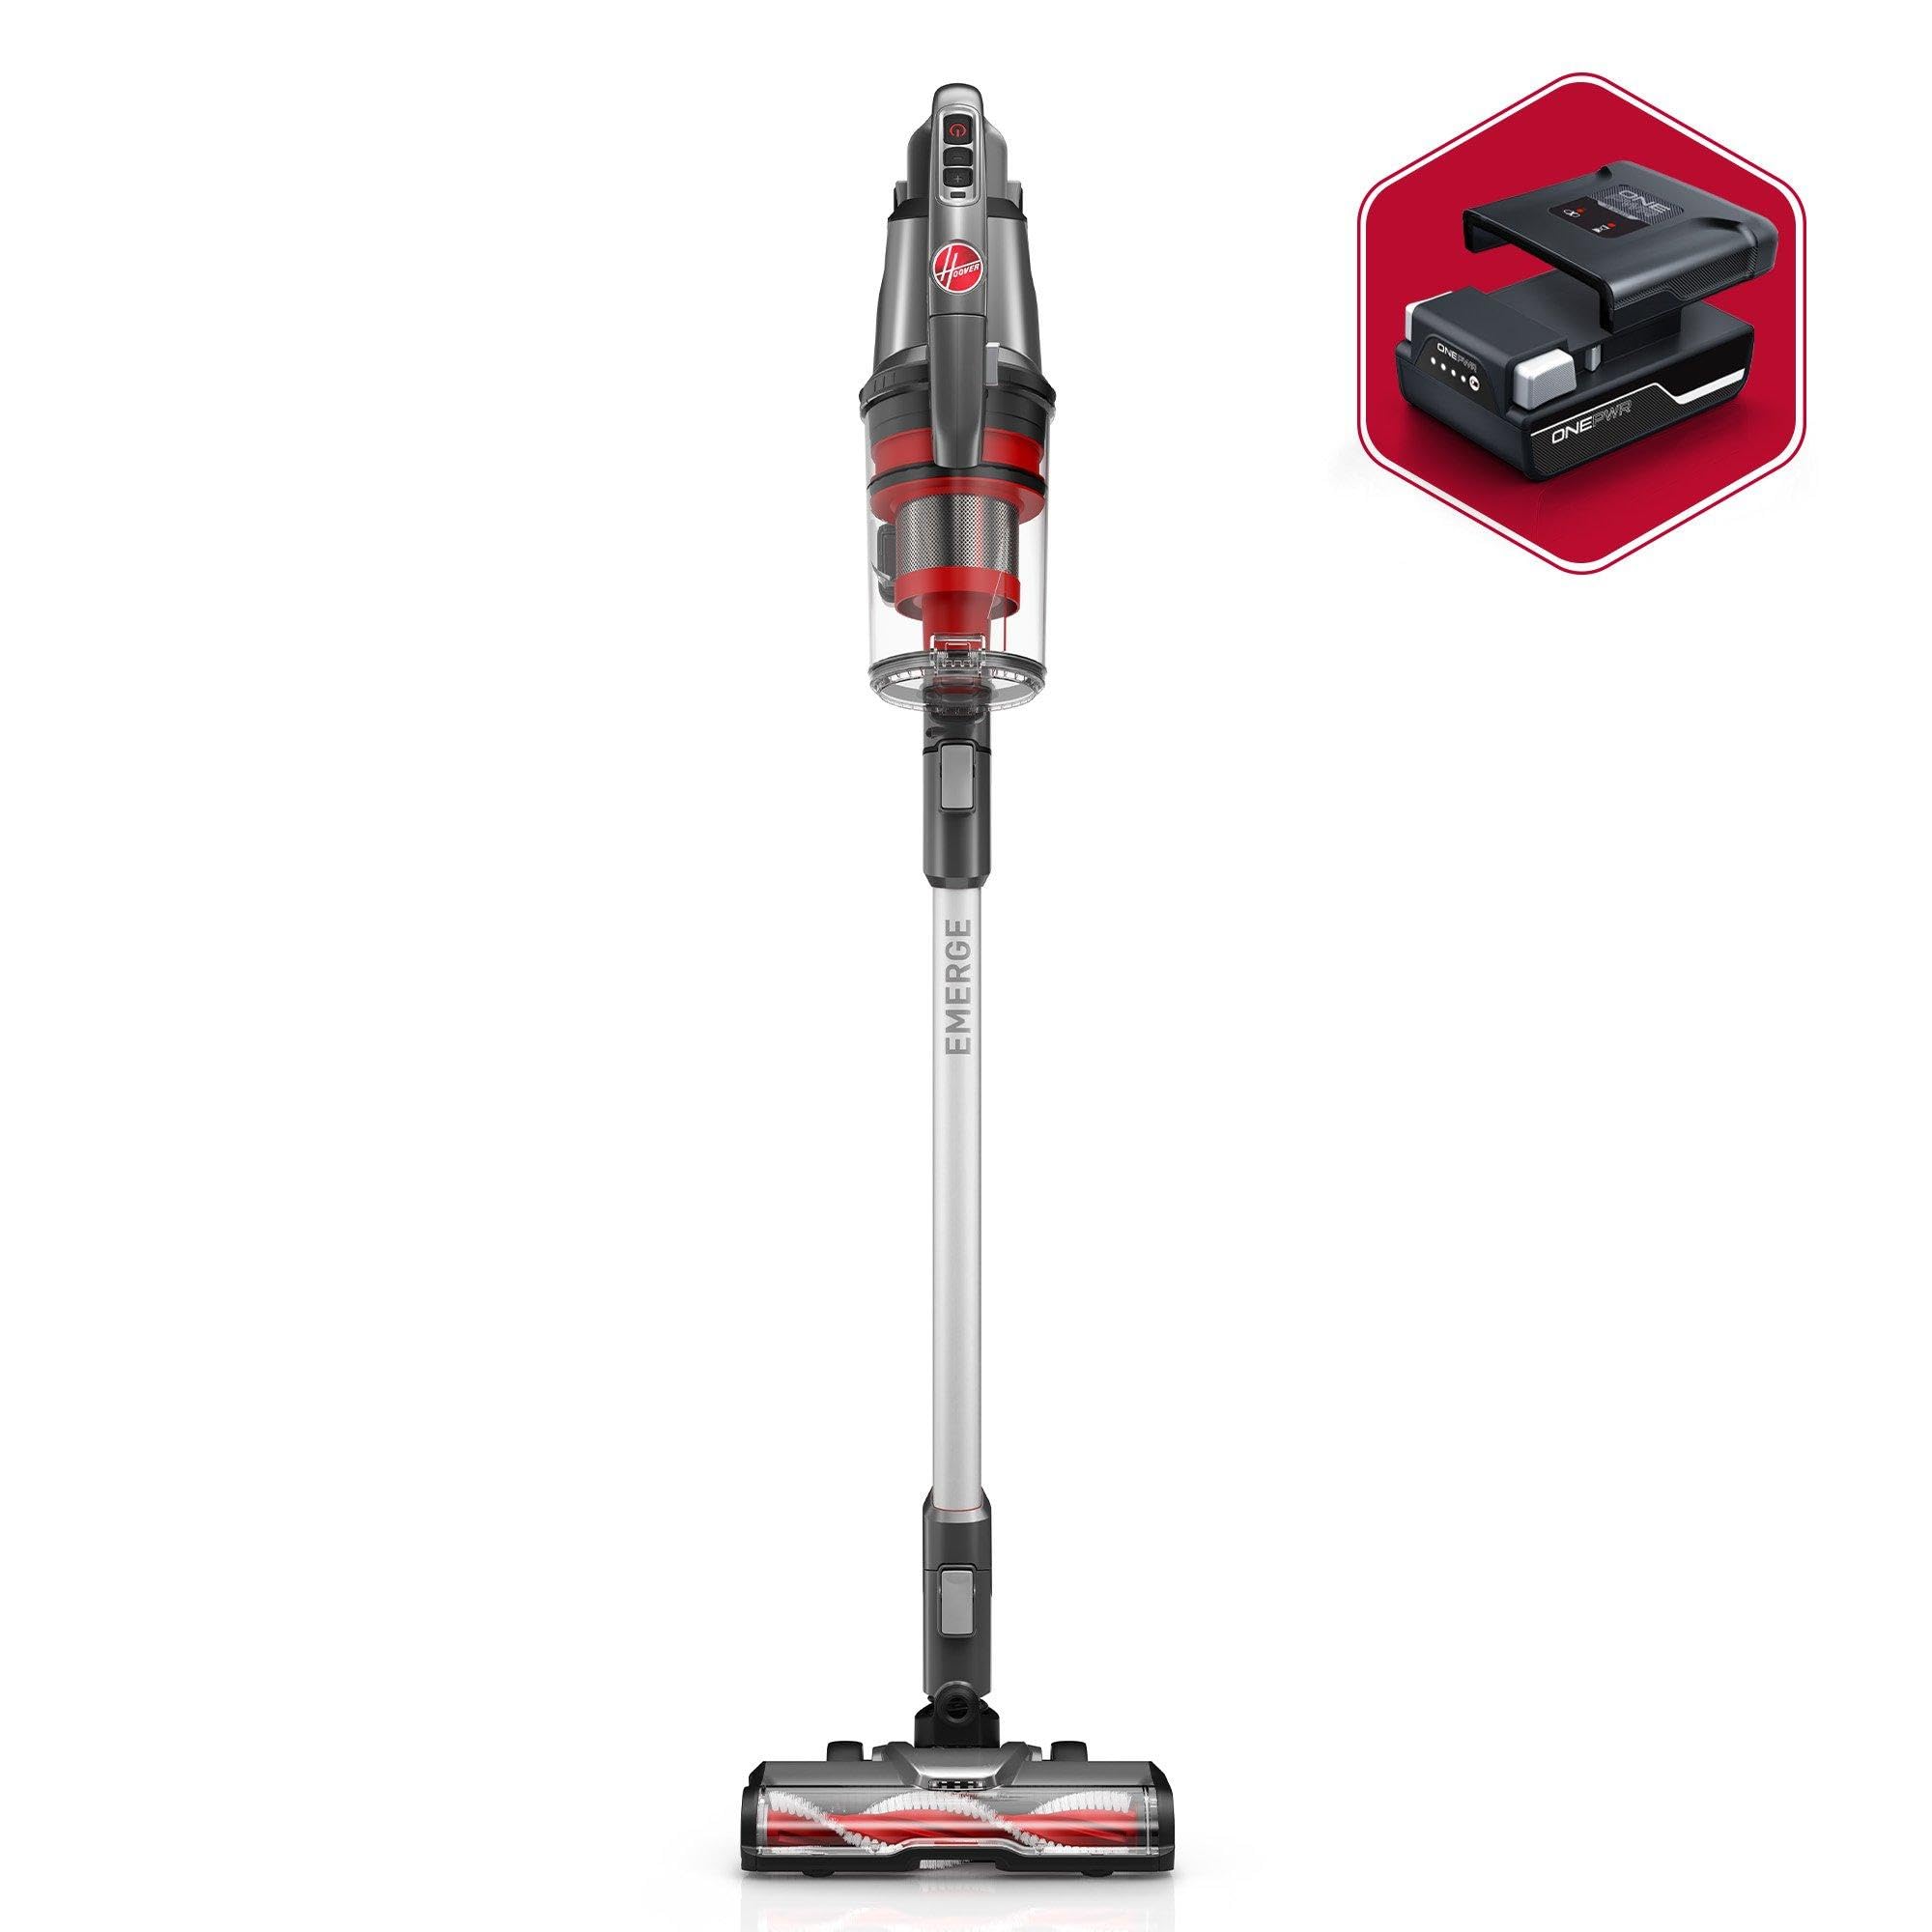 Hoover ONEPWR Emerge Pet Cordless Lightweight Stick Vacuum with All-Terrain Dual Brush Roll Nozzle